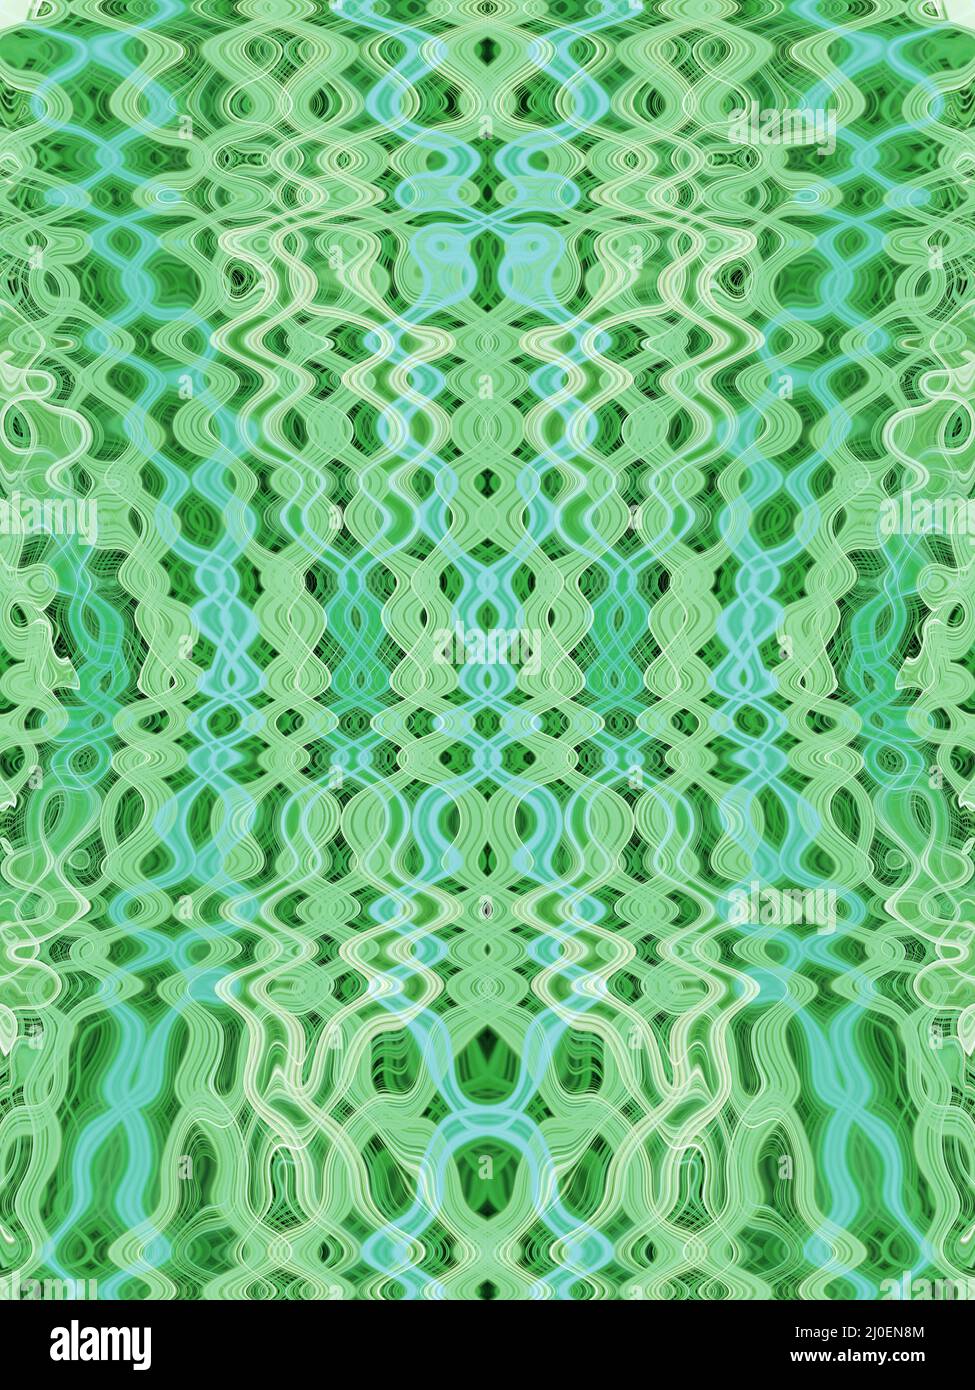 Green psychedelic pattern Stock Photo